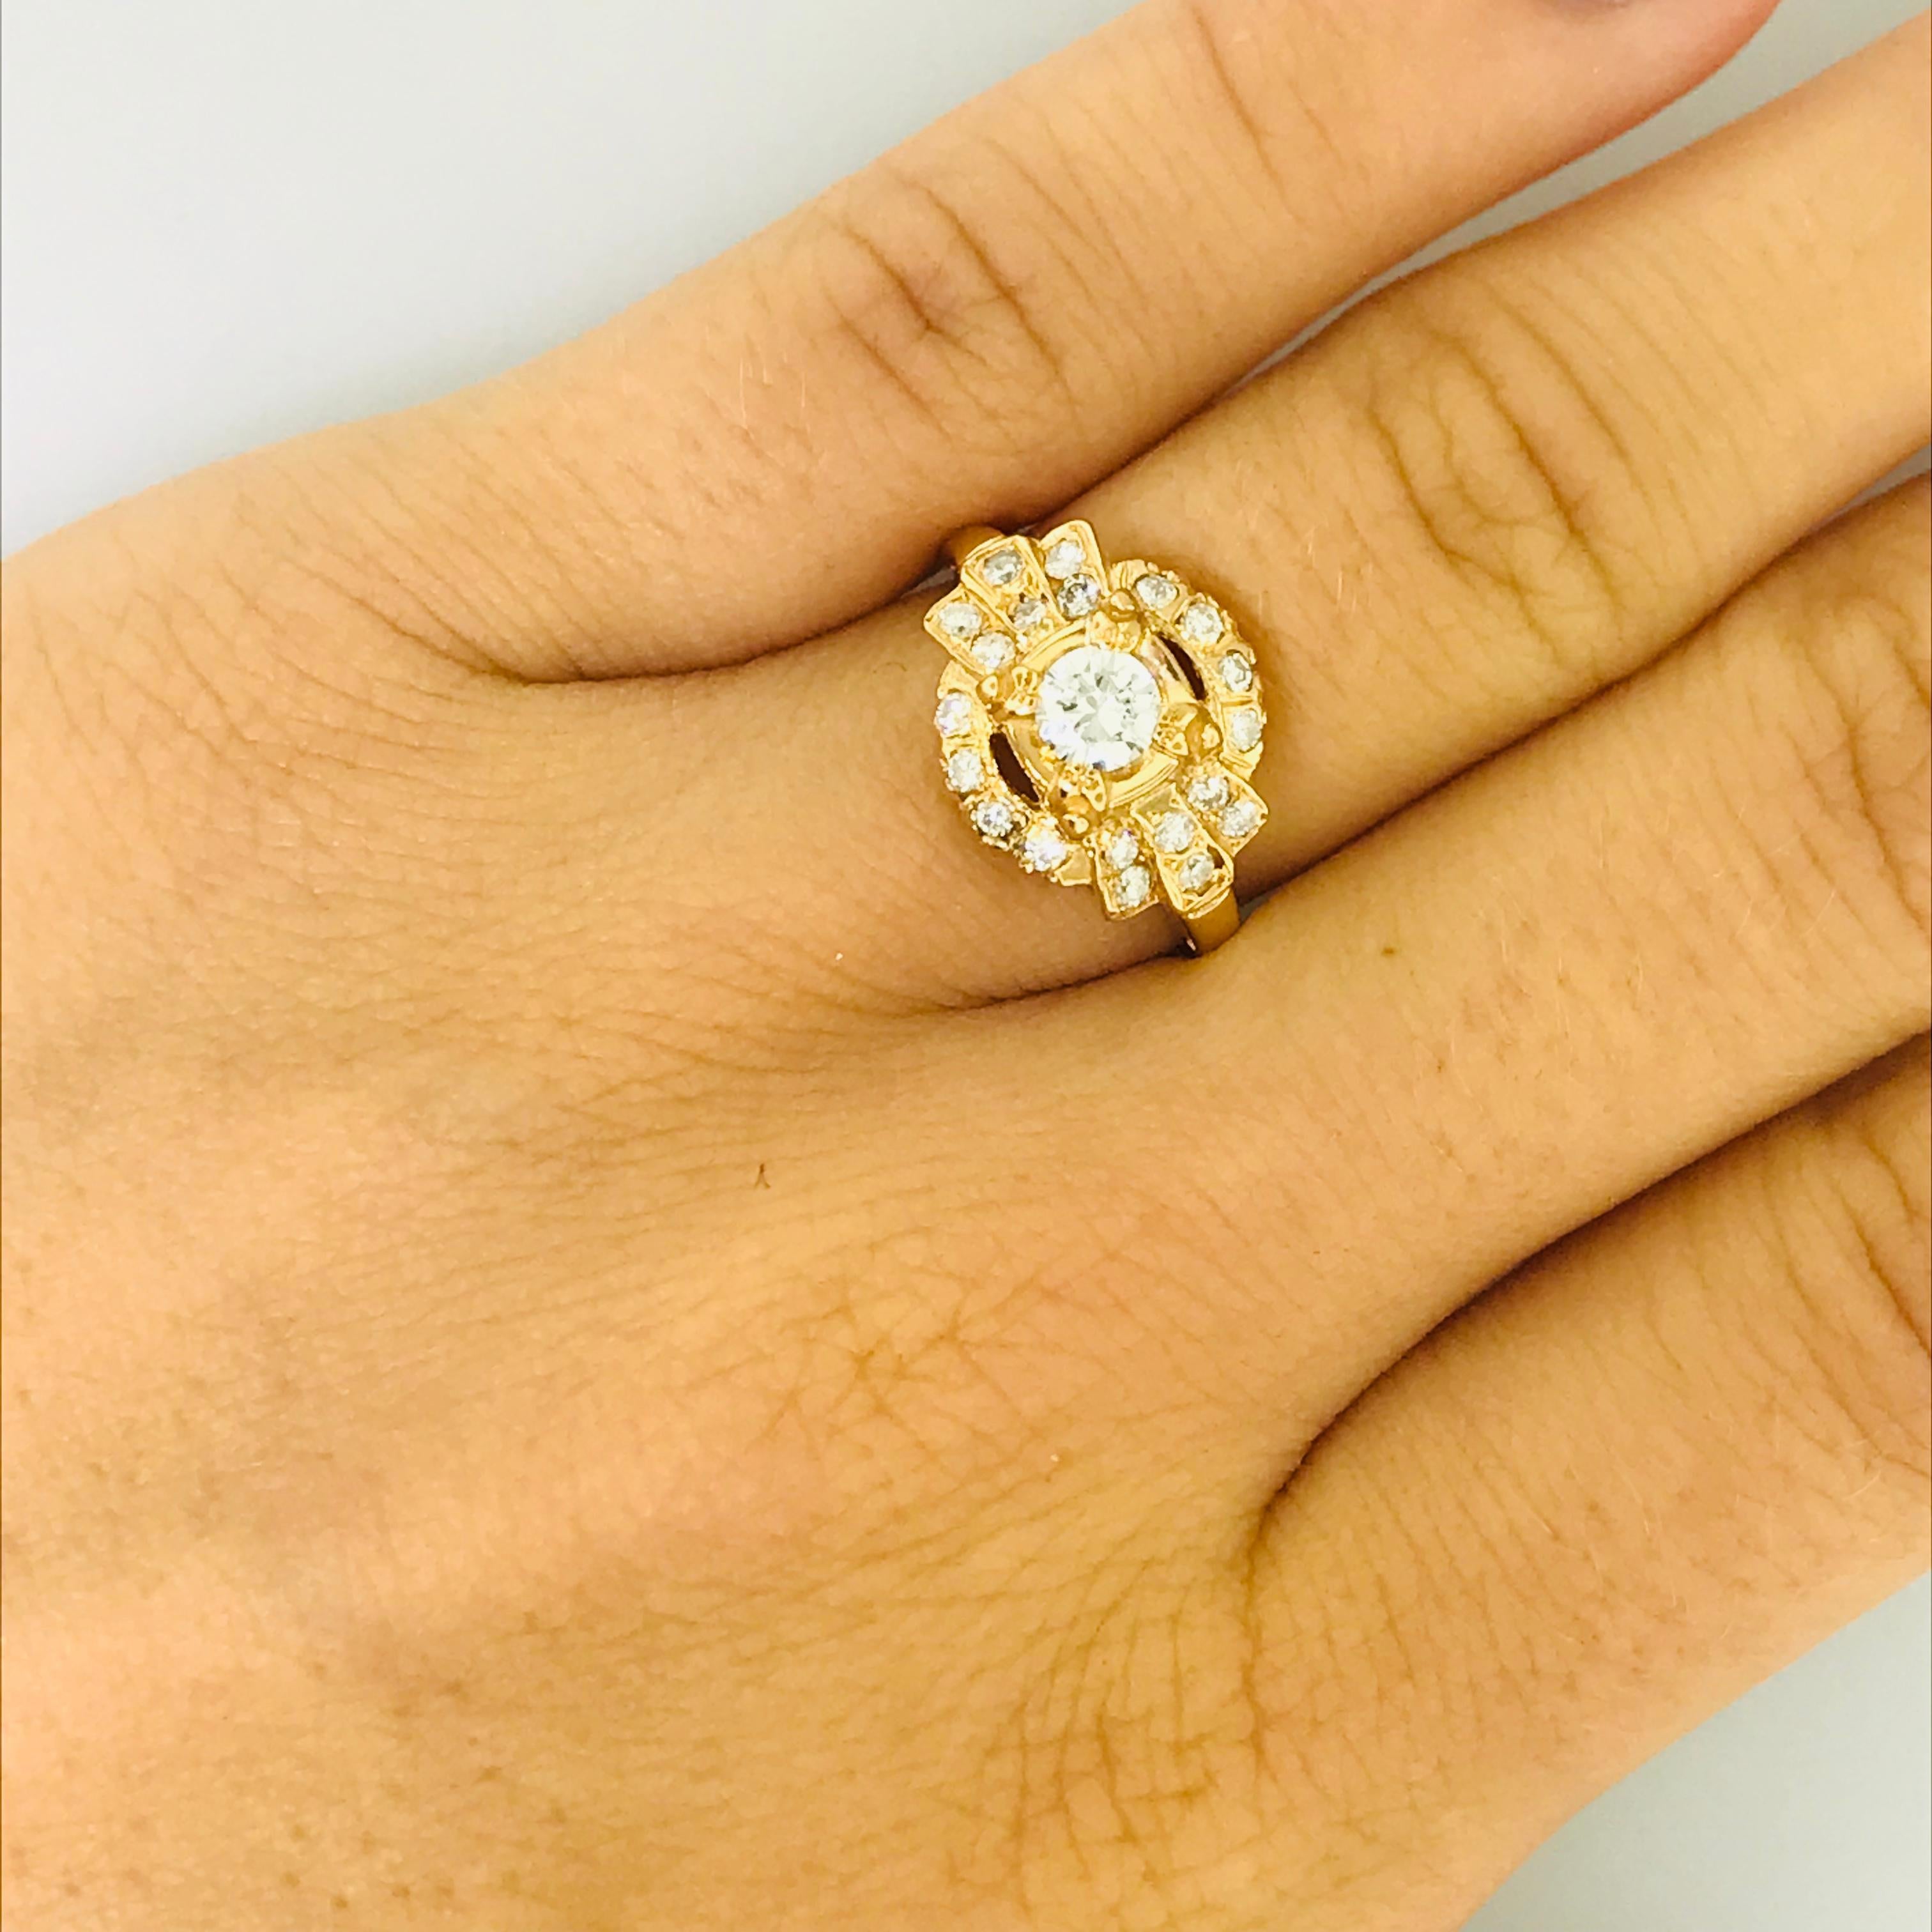 This diamond engagement ring is very special and vintage, CIRCA 1935. The vintage diamond engagement ring is a 14k yellow gold ring with a unique diamond design on top. In the center there is a round brilliant diamond that weighs .35 carat.